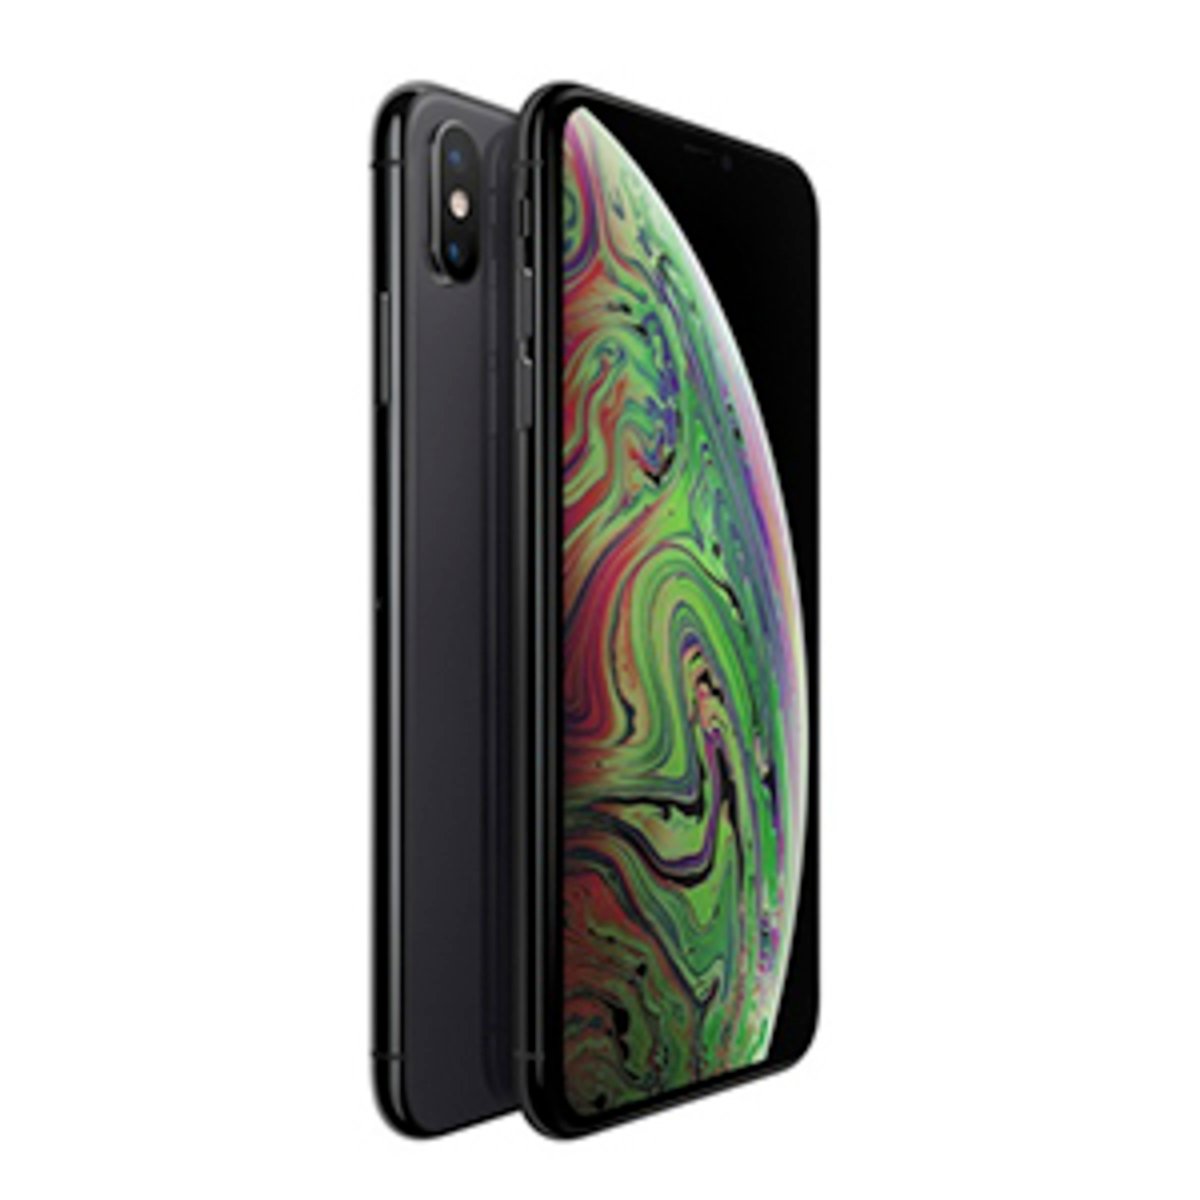 Apple iPhone XS Max 256GB Space Gray